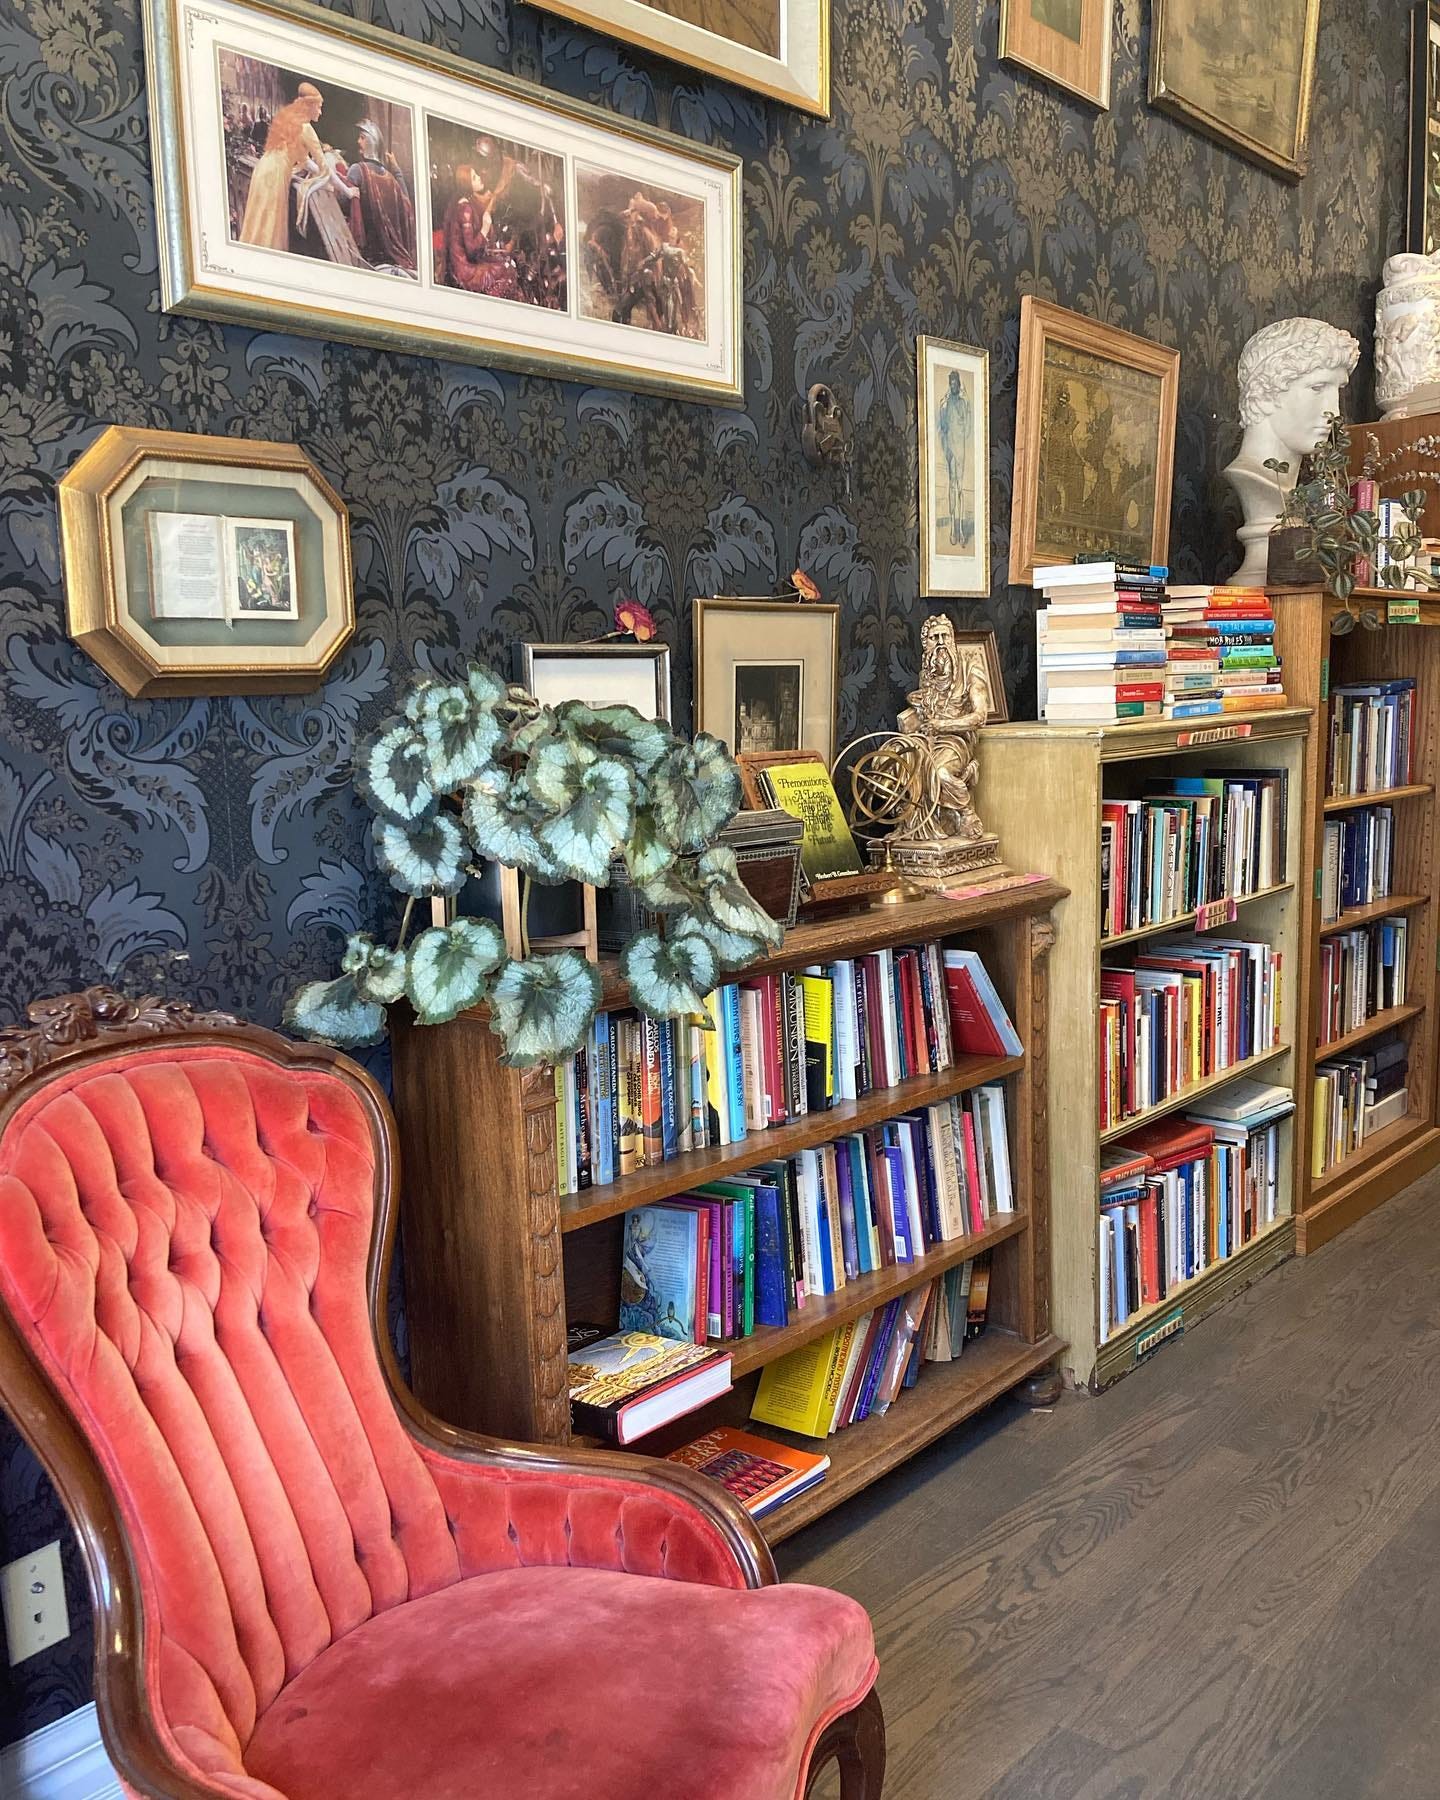 Antique orange velvet chair, bookcases ascending in height, ornate wallpaper in shades of grey-blue, with various pictures hung on it, plants and knickknacks